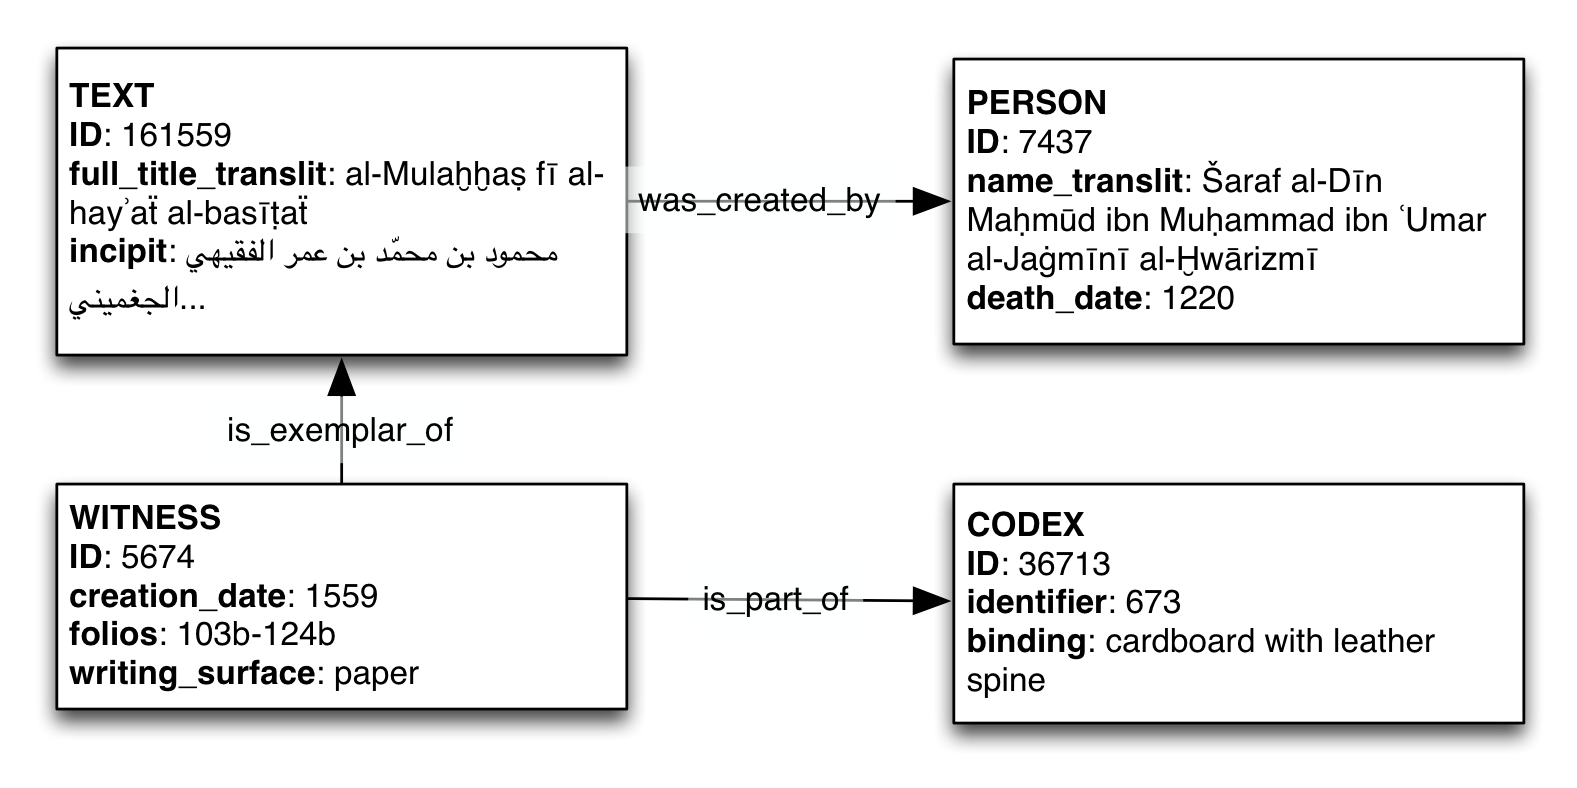 
                            Figure 2: Data model showing relations between text, witness, person and codex objects.
                        